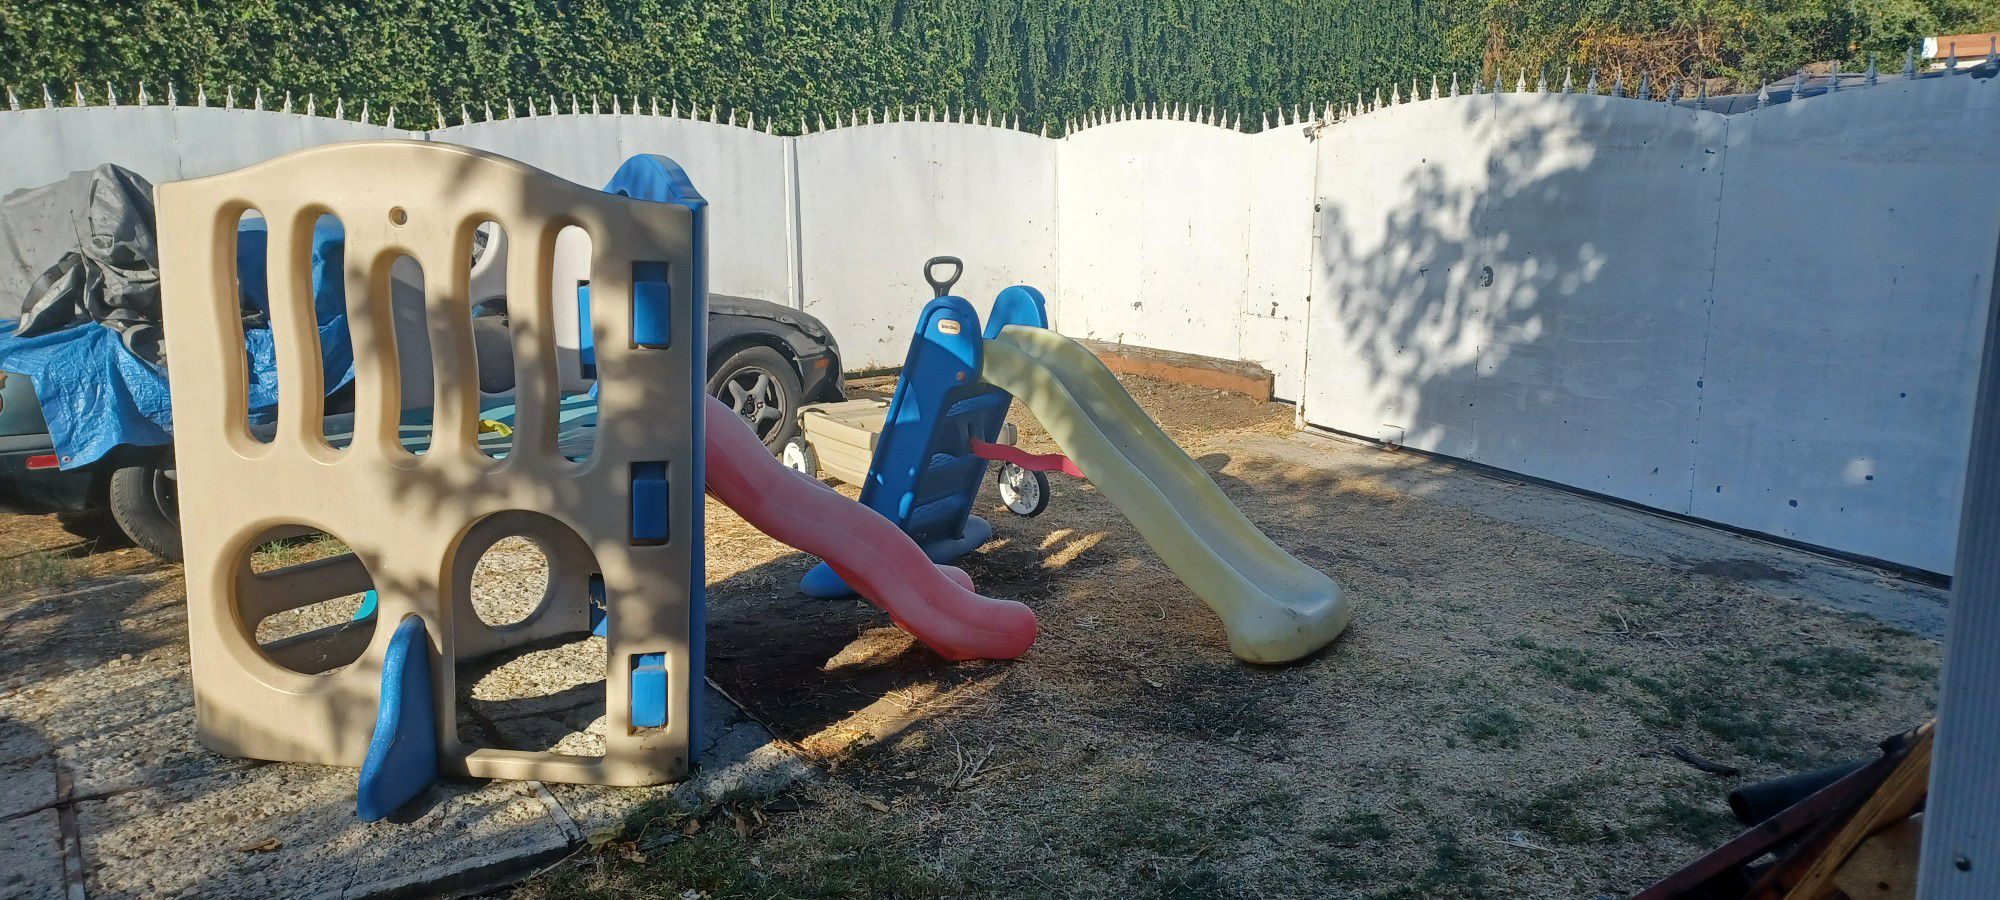 little tikes playgrounds 